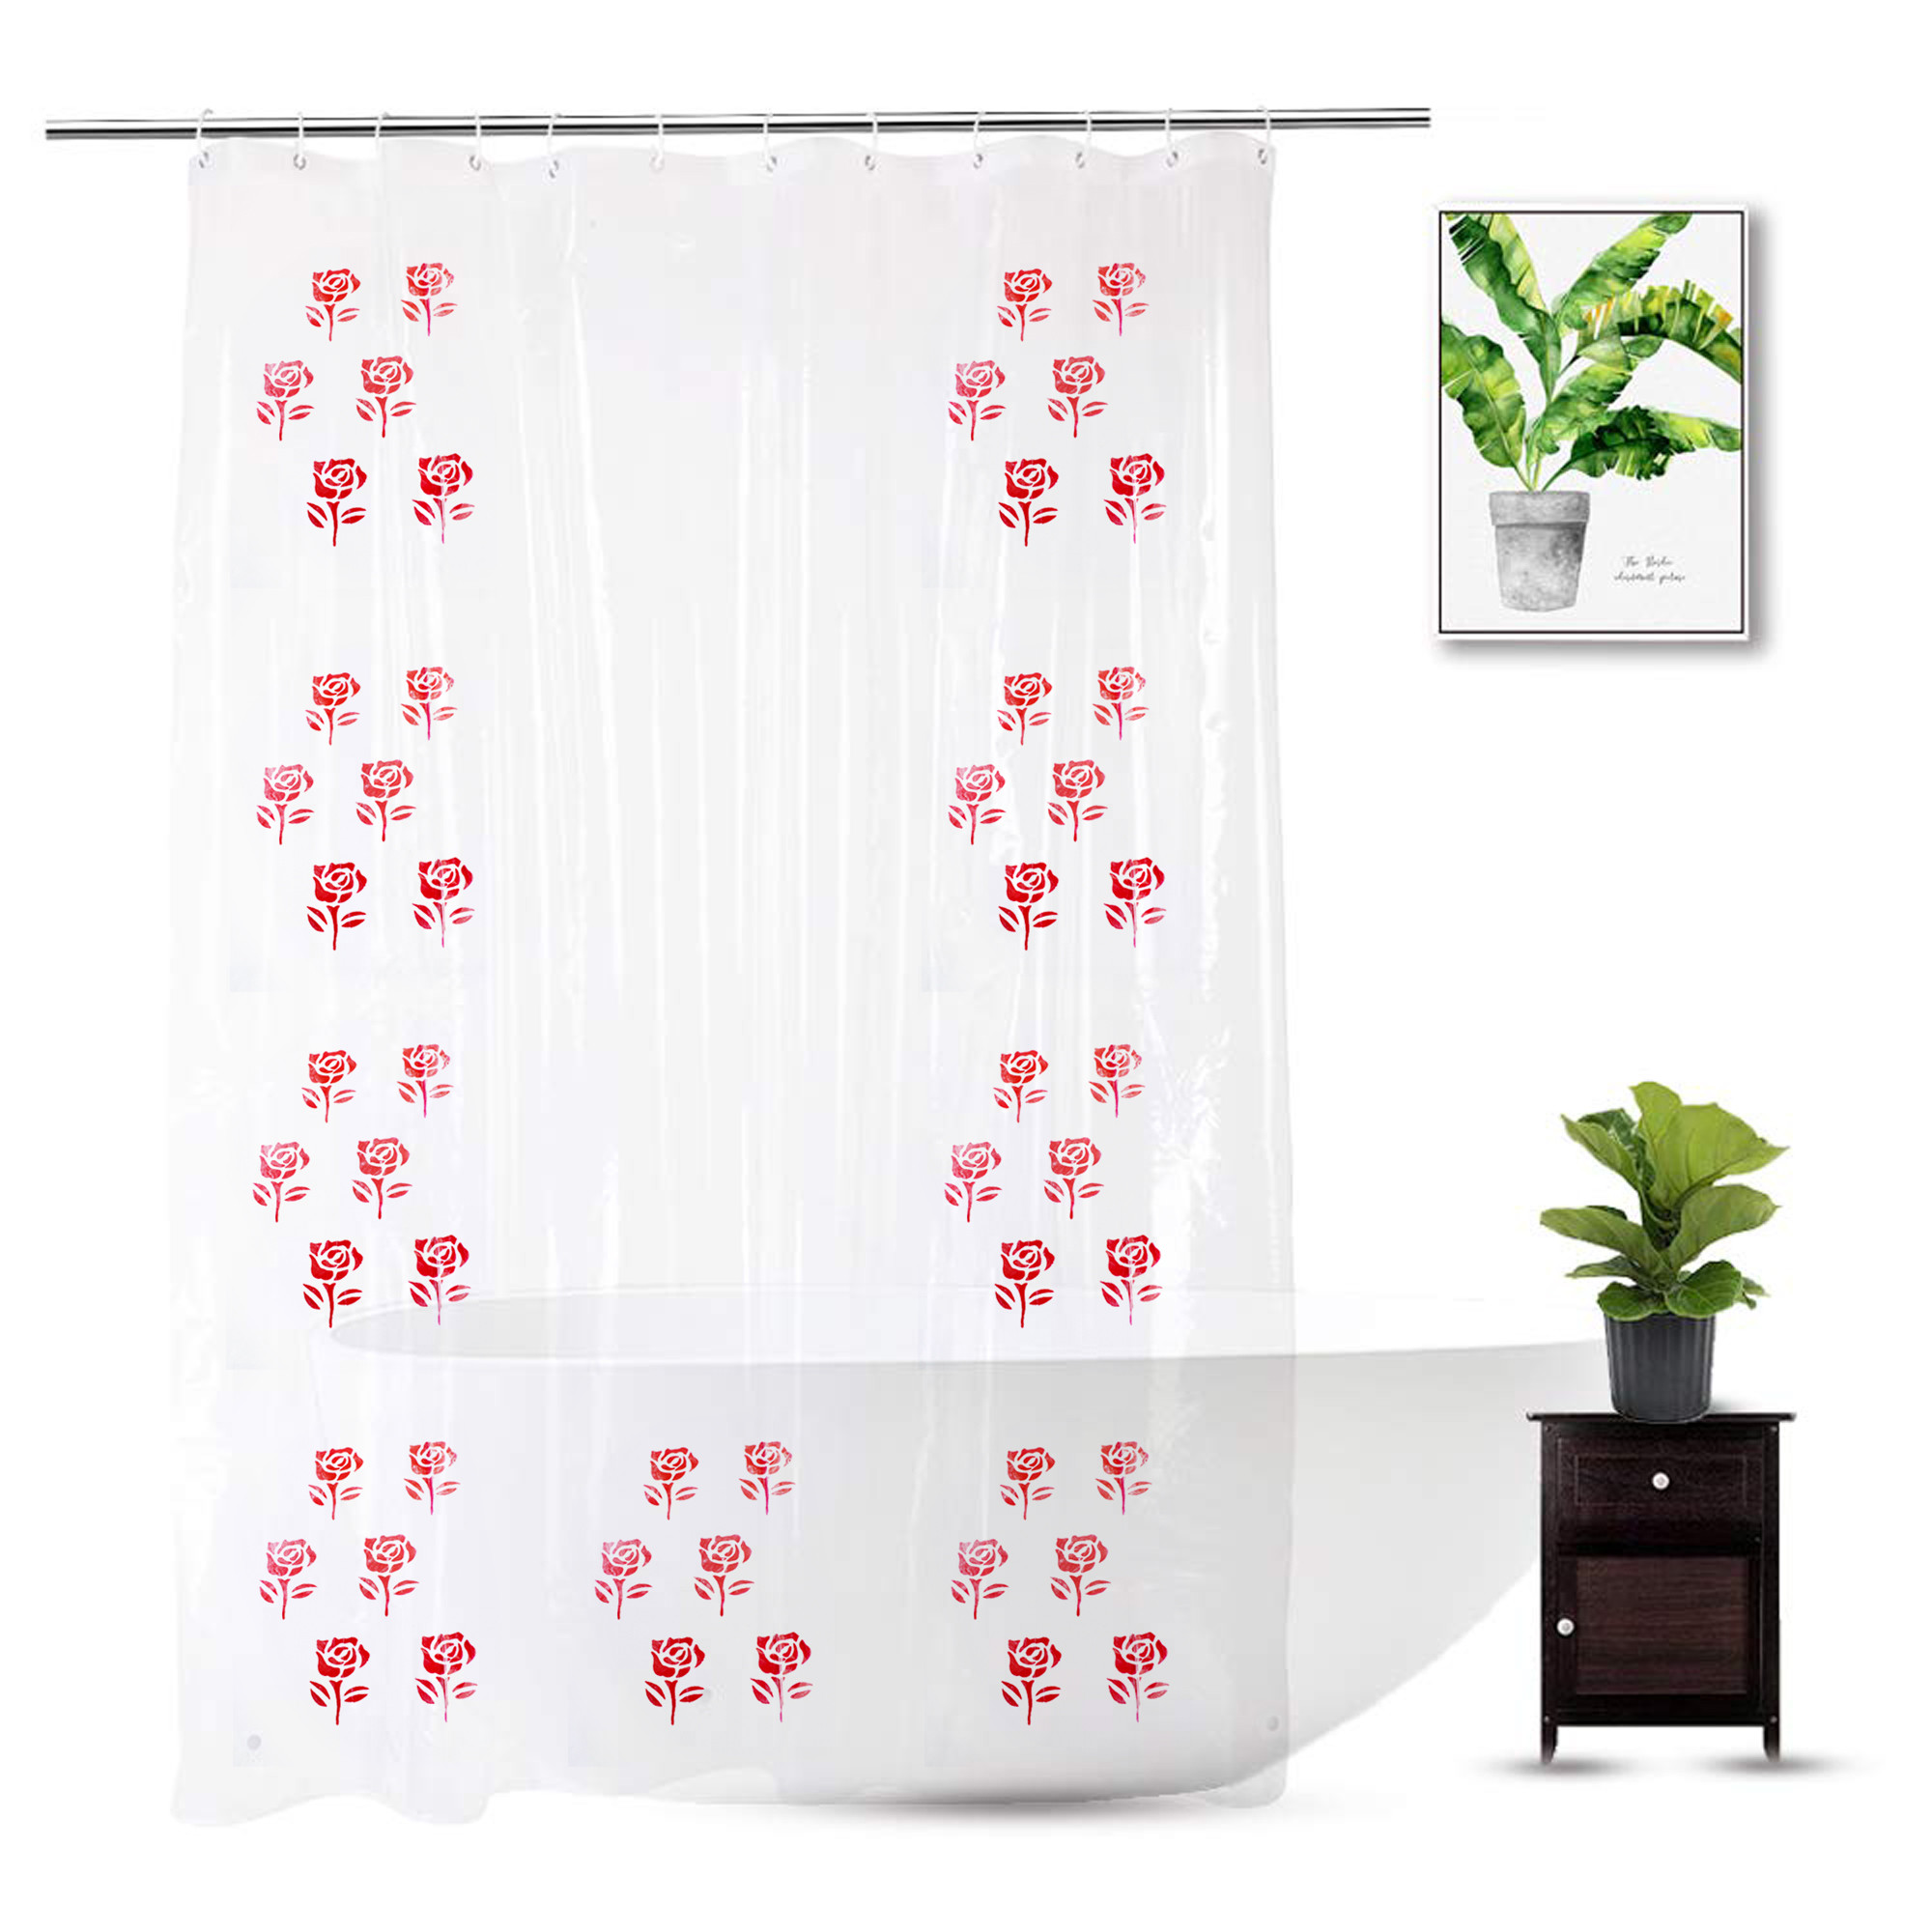 Kuber Industries 0.30mm Flower Printed Stain Resistant, No Odor, Waterproof PVC AC/Shower Curtain With Hooks,7 Feet (Transparent)